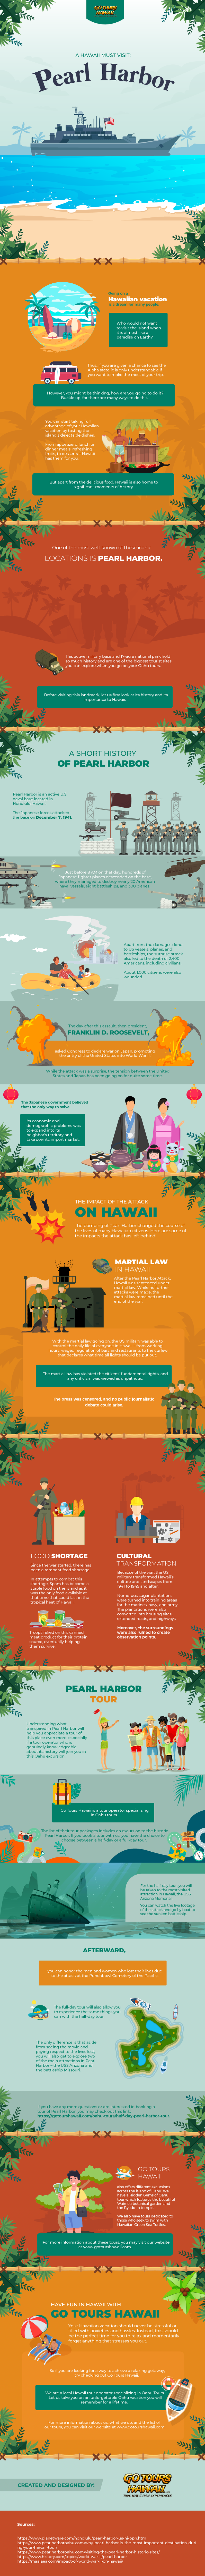 Hawaii-Tourist-Spot-Welcome-to-Pearl-Harbor-infographic-image